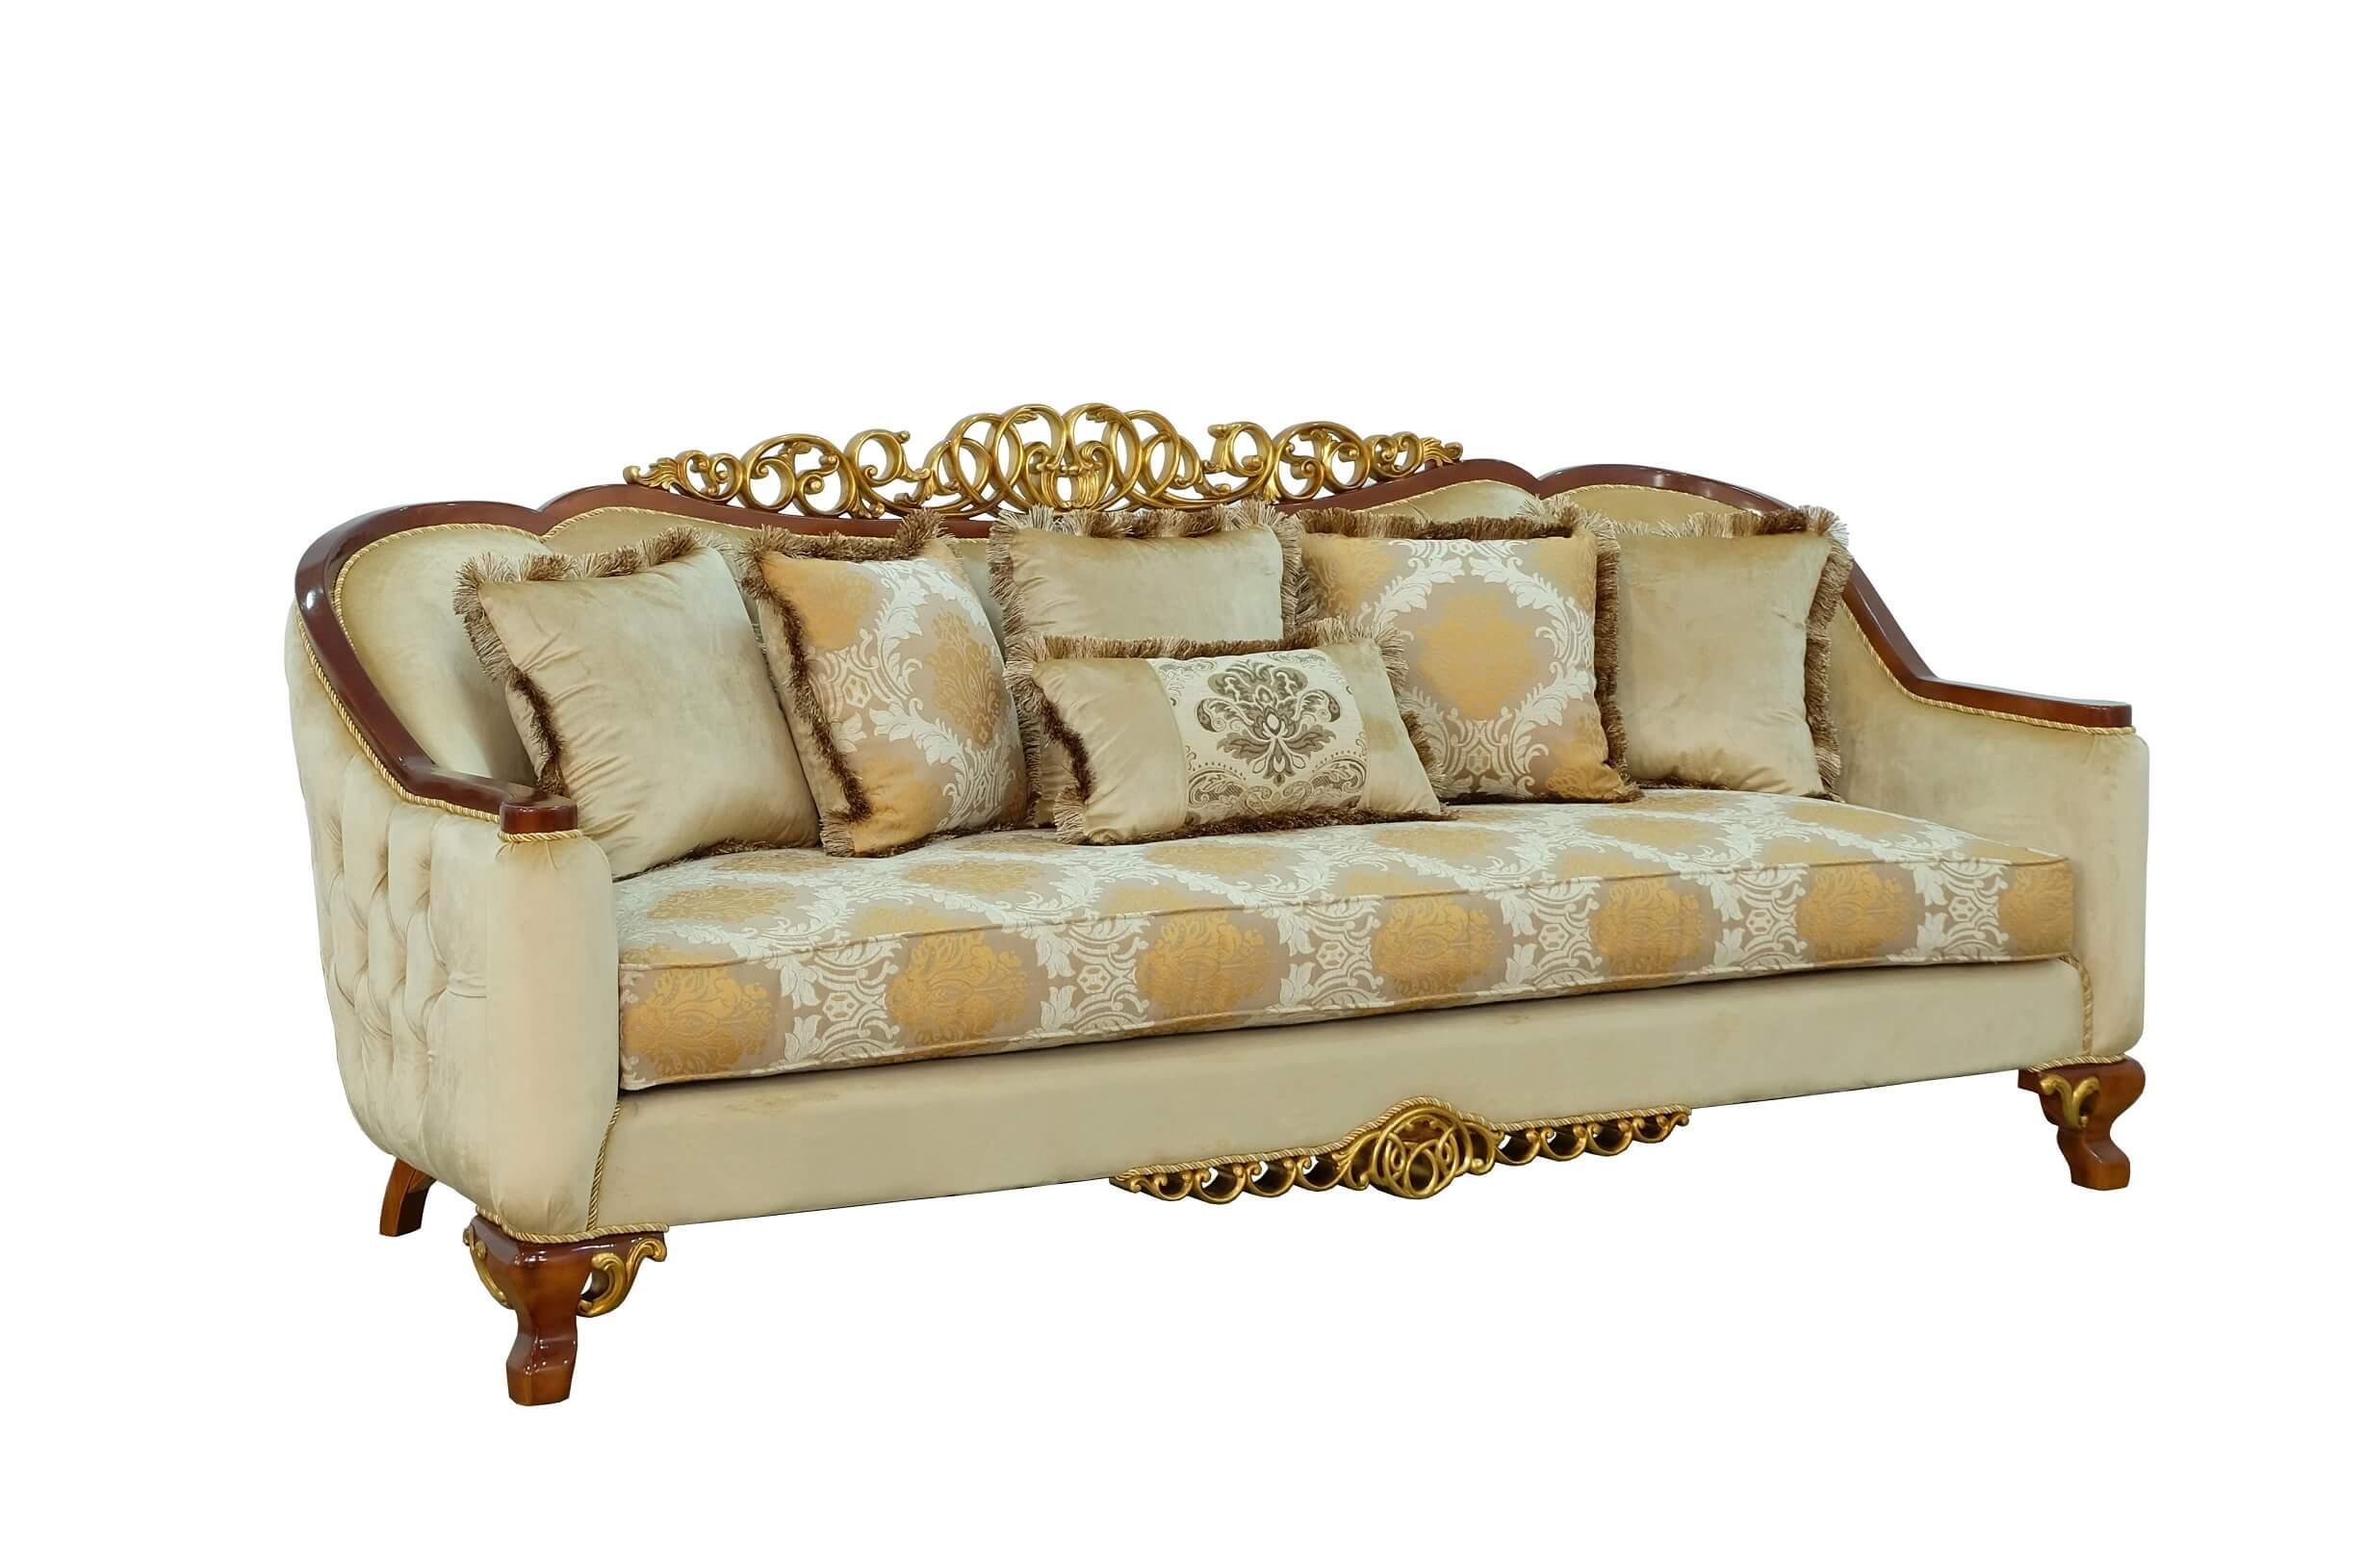 Classic, Traditional Sofa ANGELICA II 45354-S in Gold, Brown Fabric